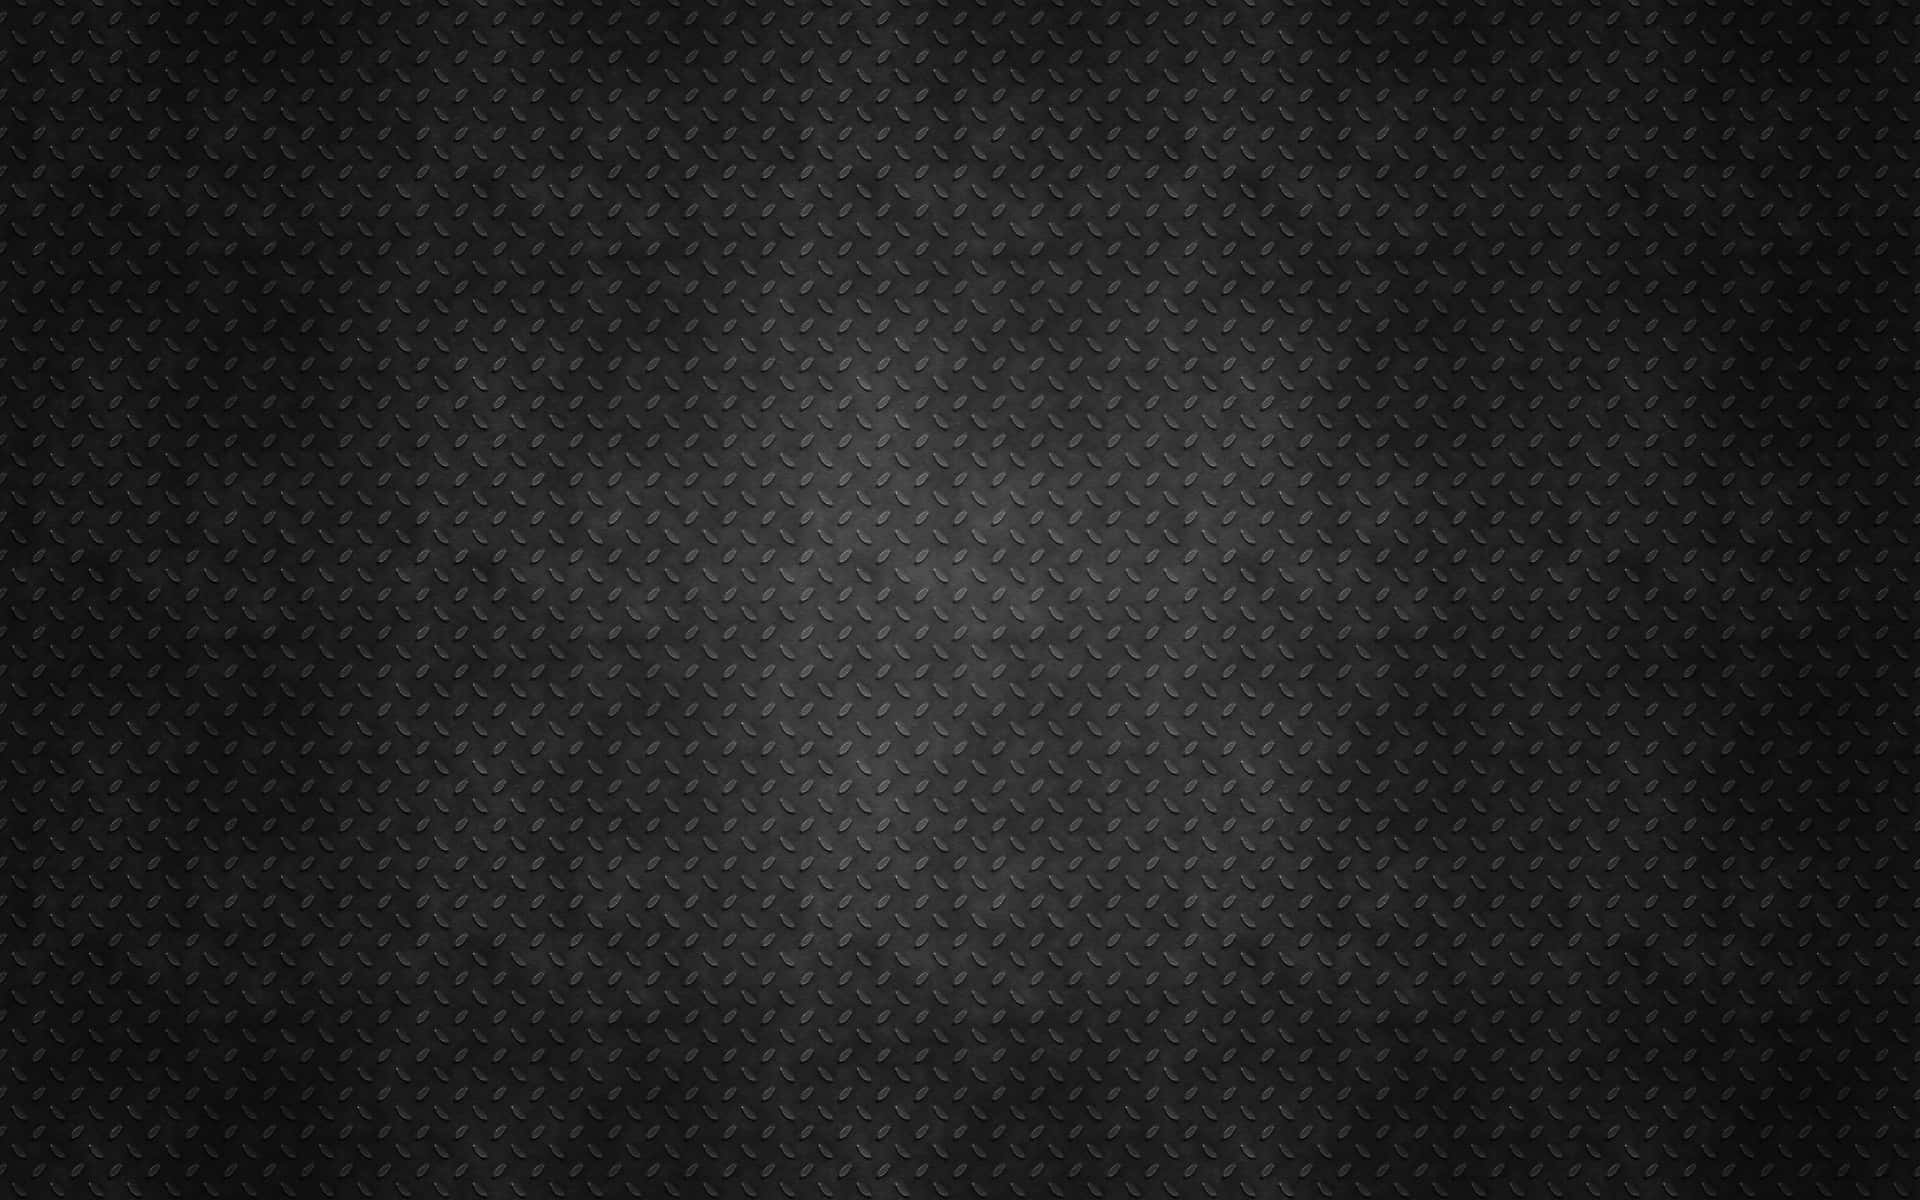 Black Grungy Metal Texture Background